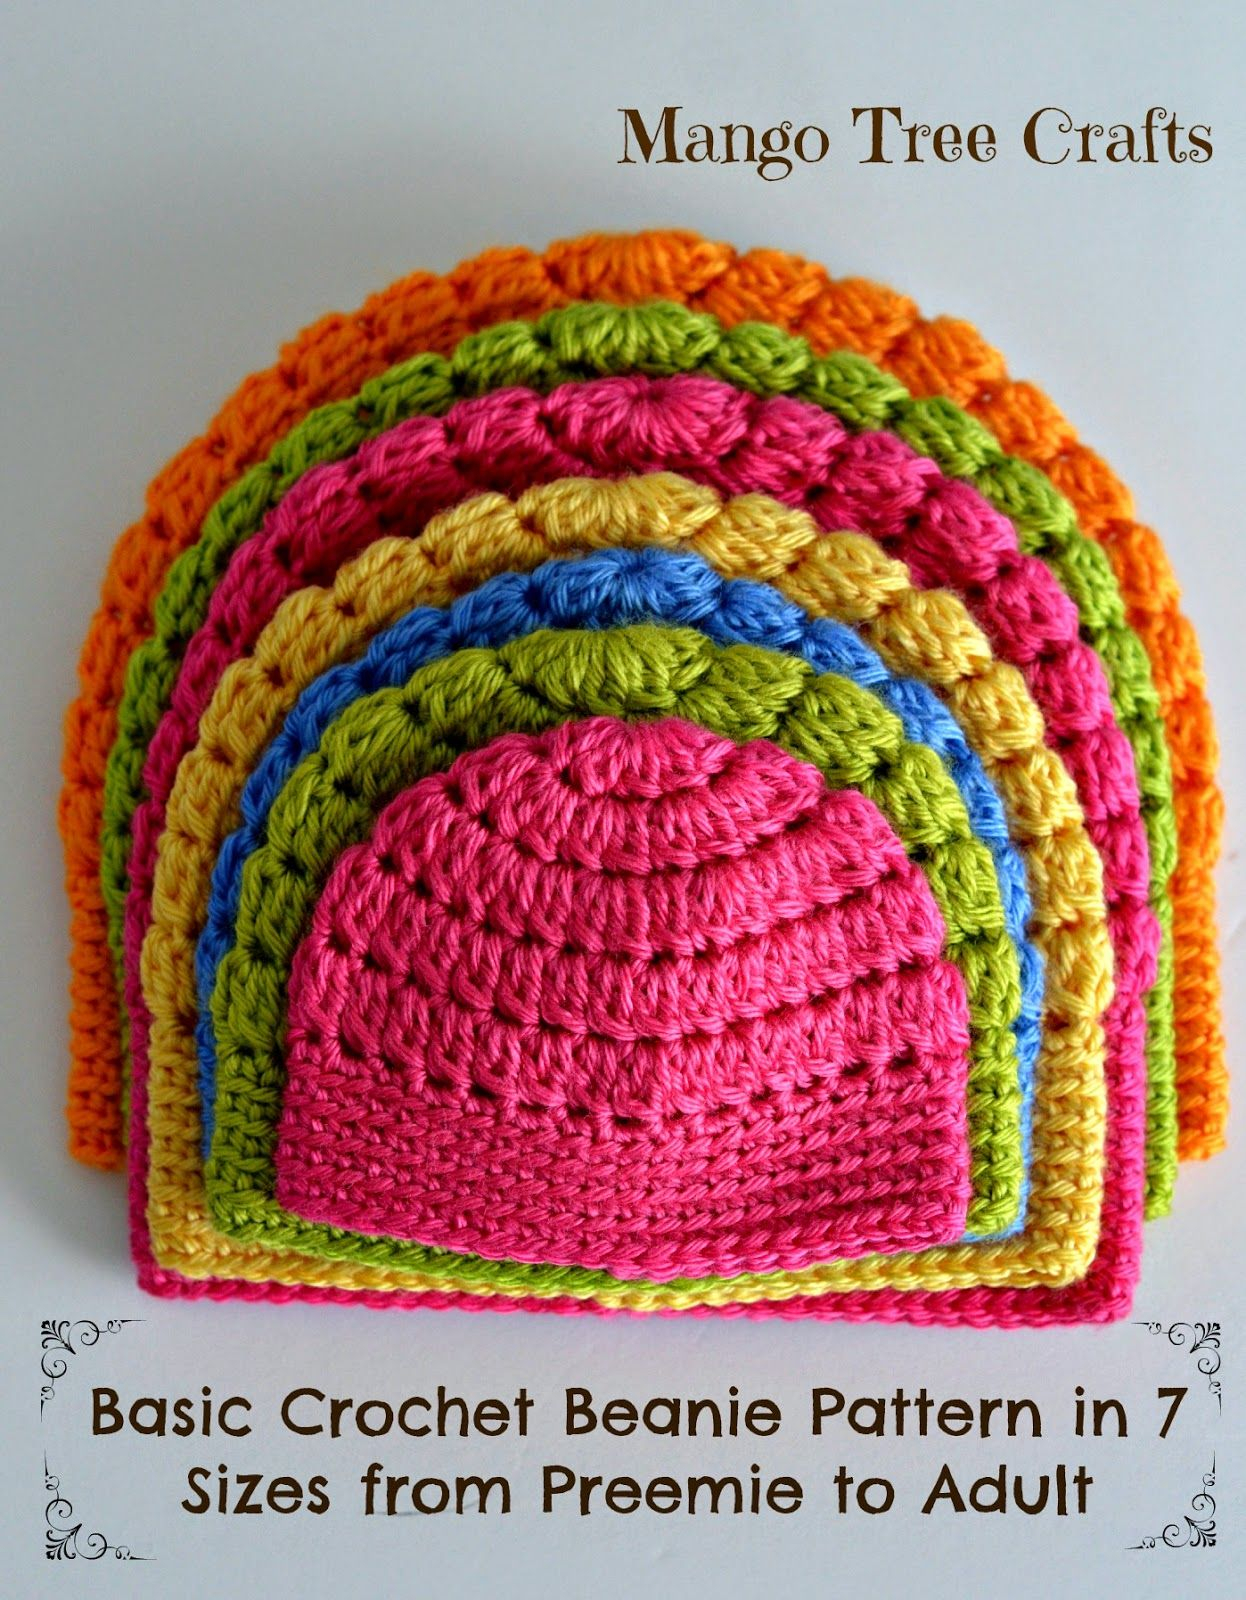 Free Crochet Baby Hats Patterns Easy Beanie Pattern From Newborn To Adult Size 7 Sizes Available Nice